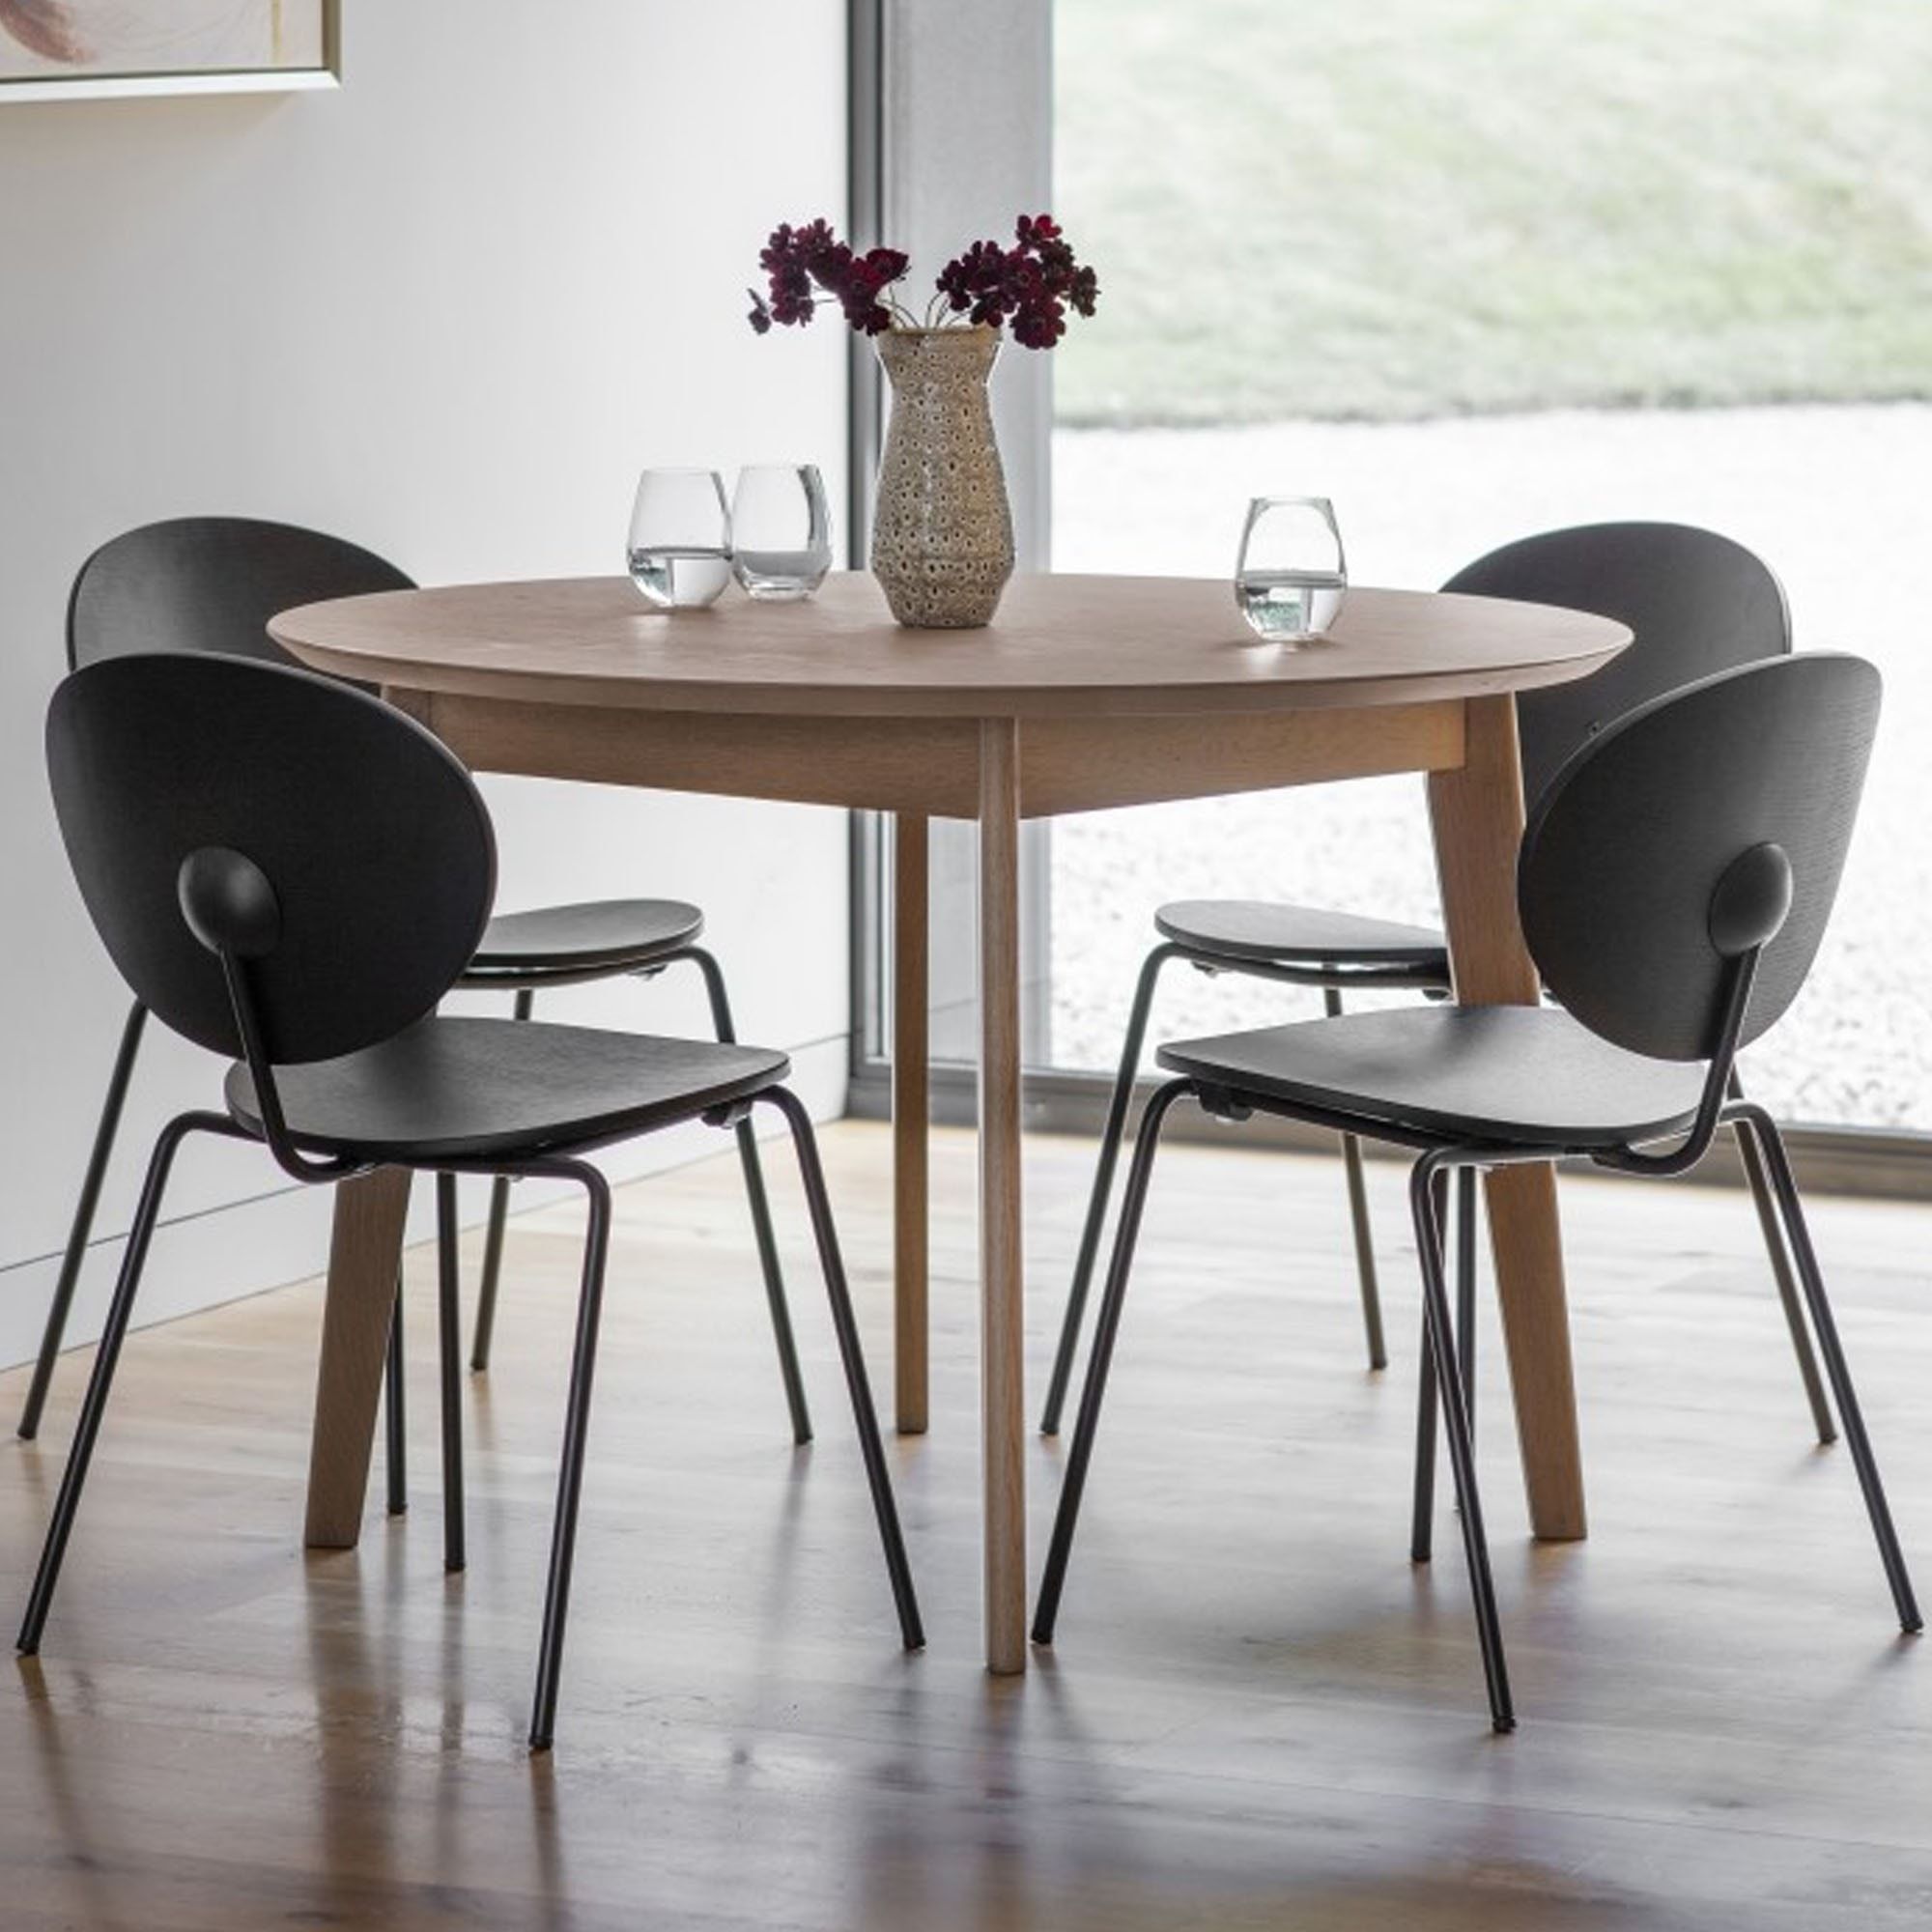 Forden Round Dining Table Grey | Grey Dining Table Inside 2017 Gray Dining Tables (View 5 of 15)